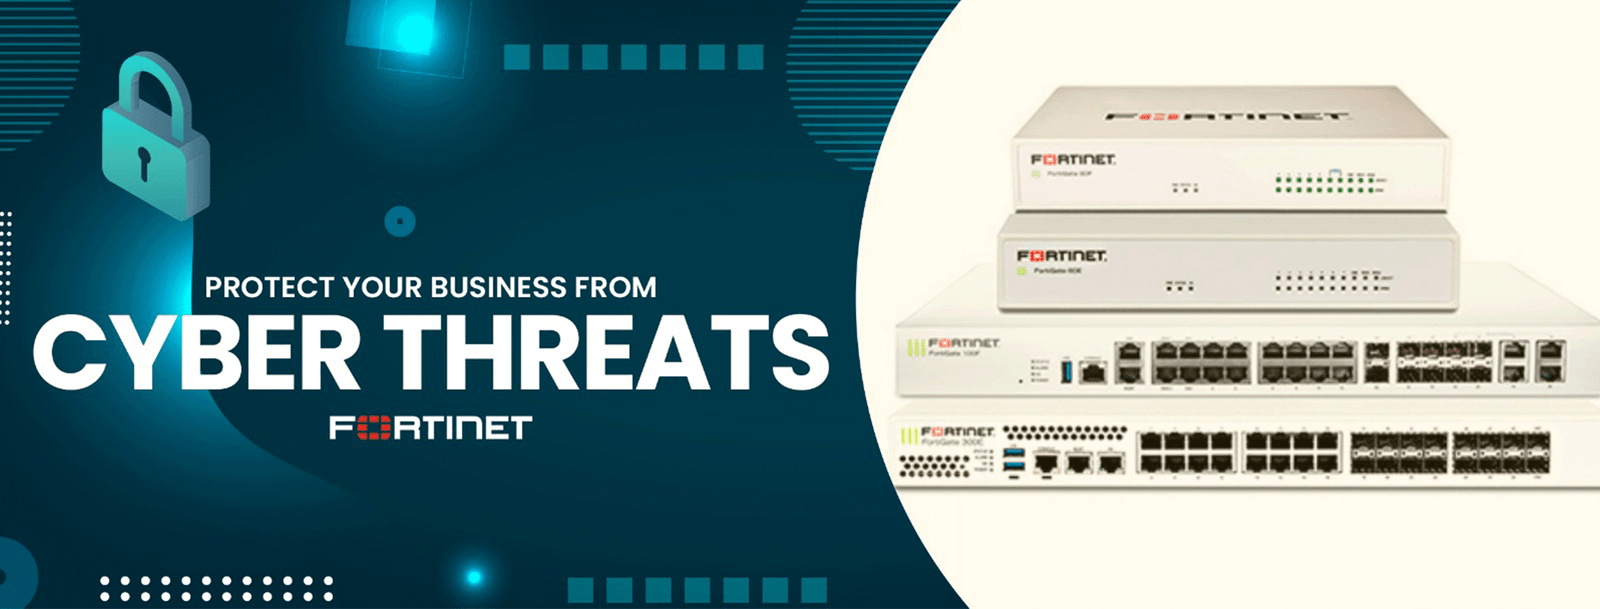 Telenoc is Fortinet Partner in Saudi Arabia providing fortinet products services for fortigate 40f, fortigate 60f, fortigate 70f, fortigate 80f, fortigate 100e, fortigate 100f, fortigate 101f, fortigate 200f, fortigate 200d We are also dealing in fortinet license renewal if you want to know fortigate 60d license renewal price contact us.